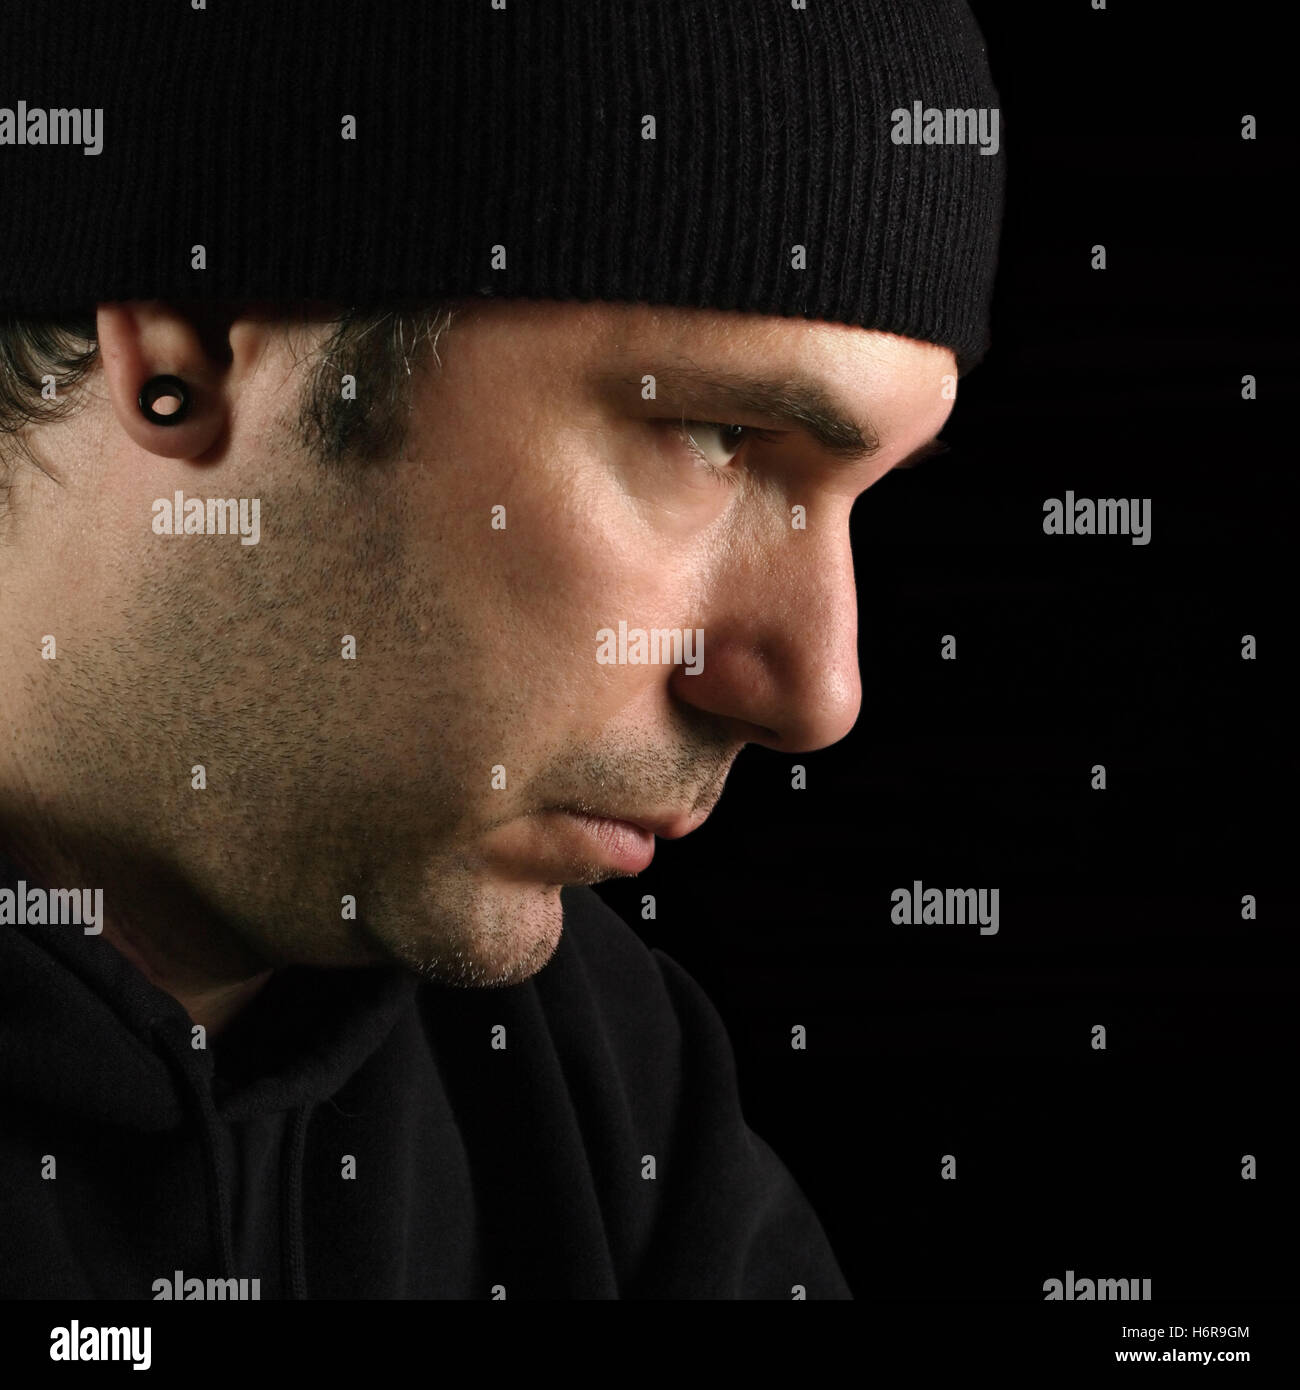 danger male masculine stare criminal theif thief danger closeup male masculine face portrait person eyes mood look glancing see Stock Photo